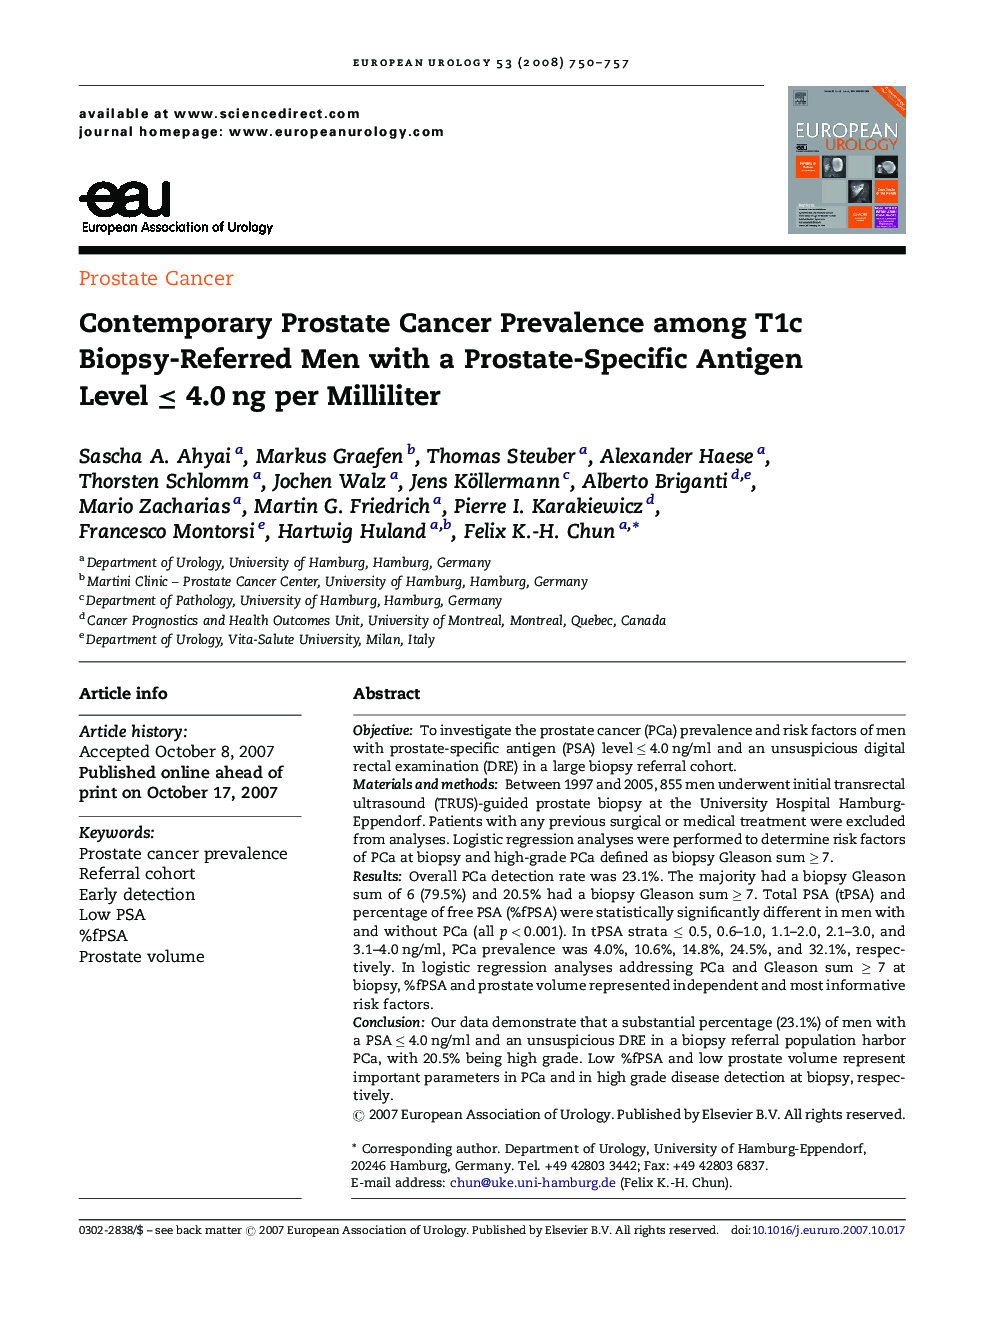 Contemporary Prostate Cancer Prevalence among T1c Biopsy-Referred Men with a Prostate-Specific Antigen Level ≤ 4.0 ng per Milliliter